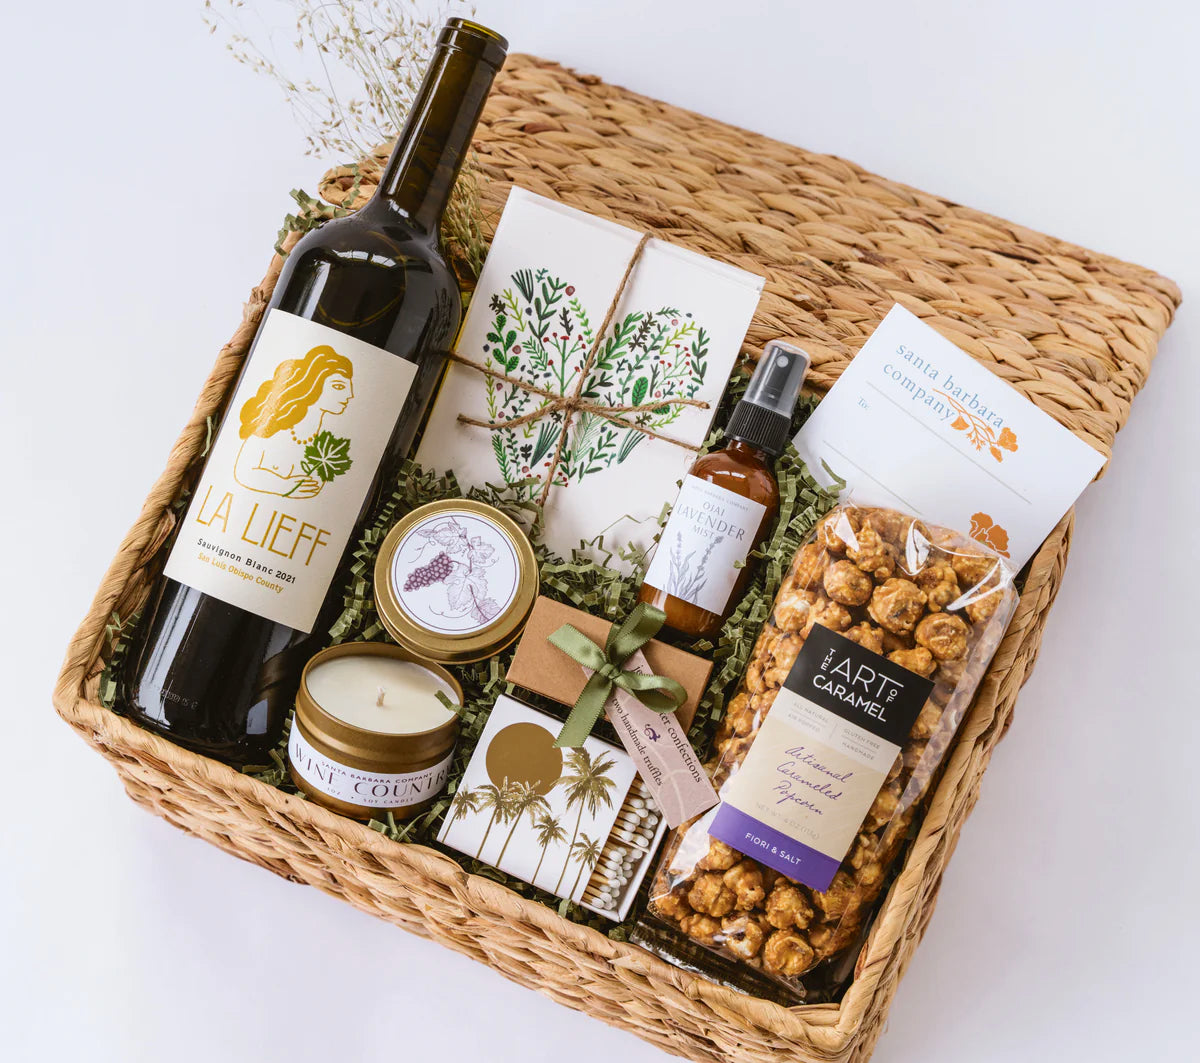 Basket with wine, cards, popcorn, a candle, matches, body spray and truffles